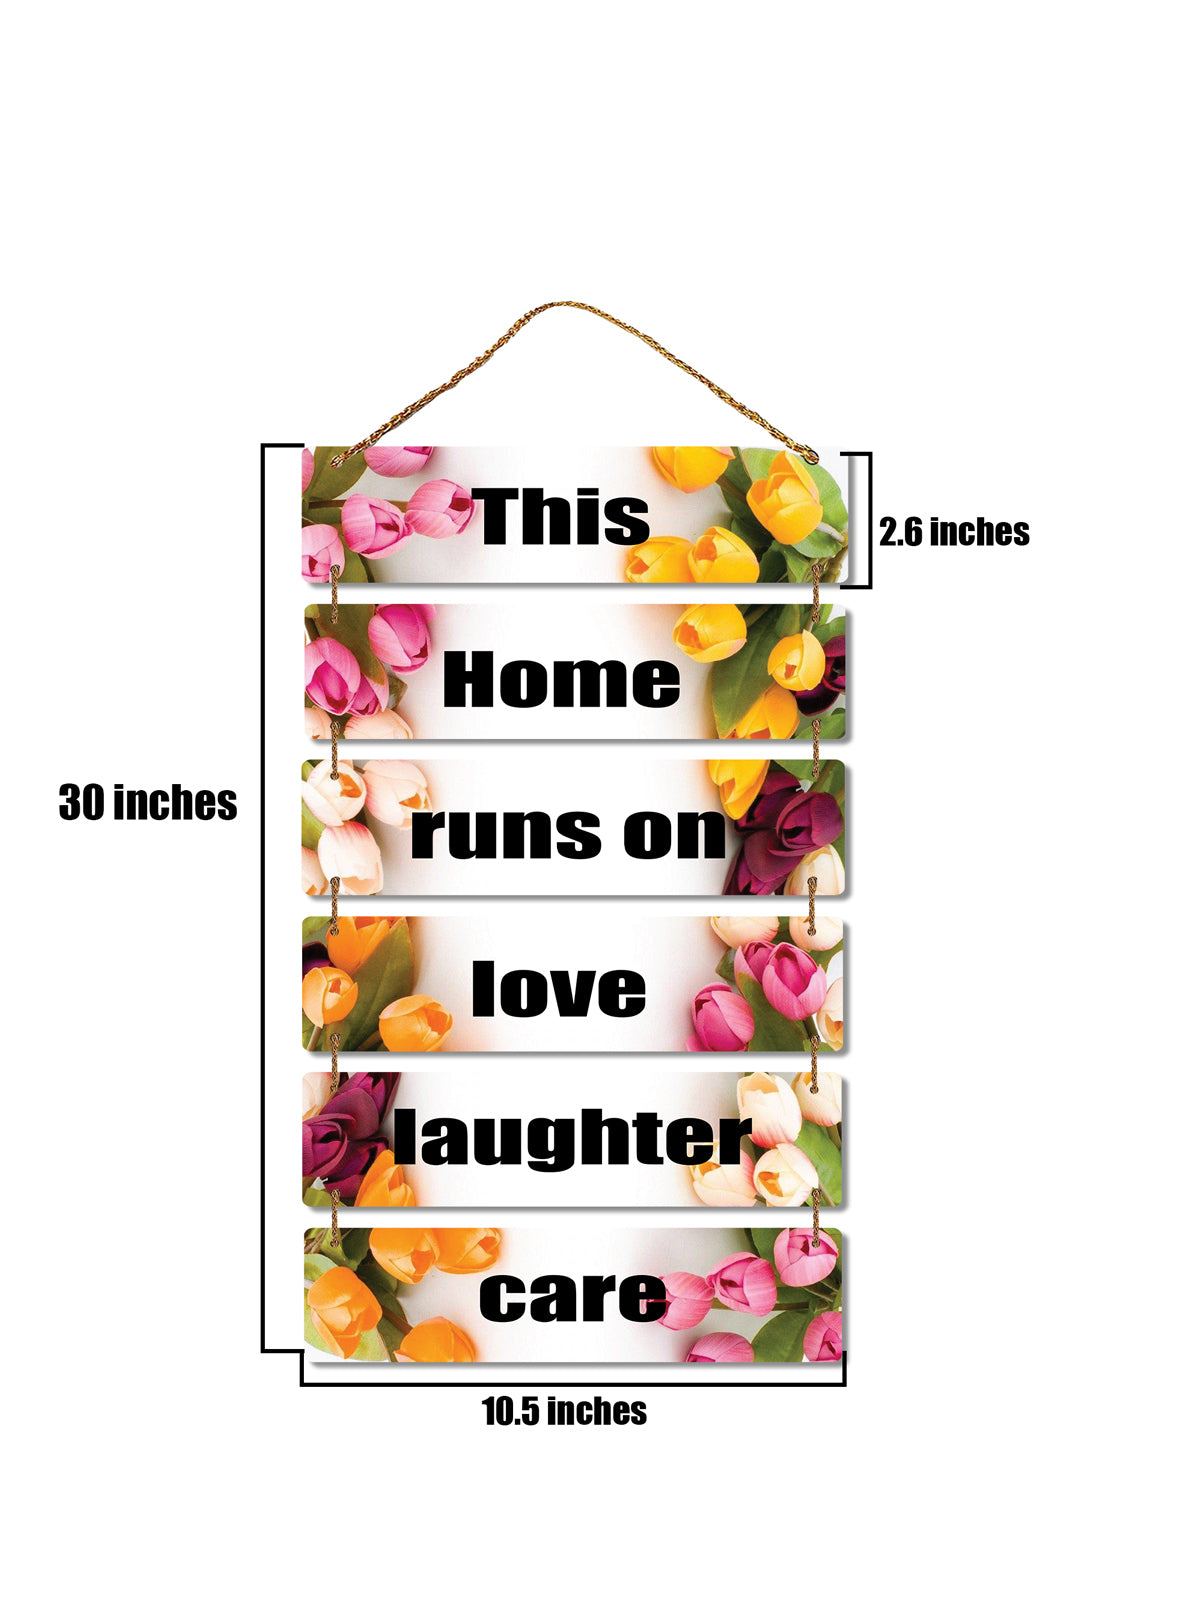 This Home Runs on Love Laughter Care 6 Blocks Wooden Wall Hanging